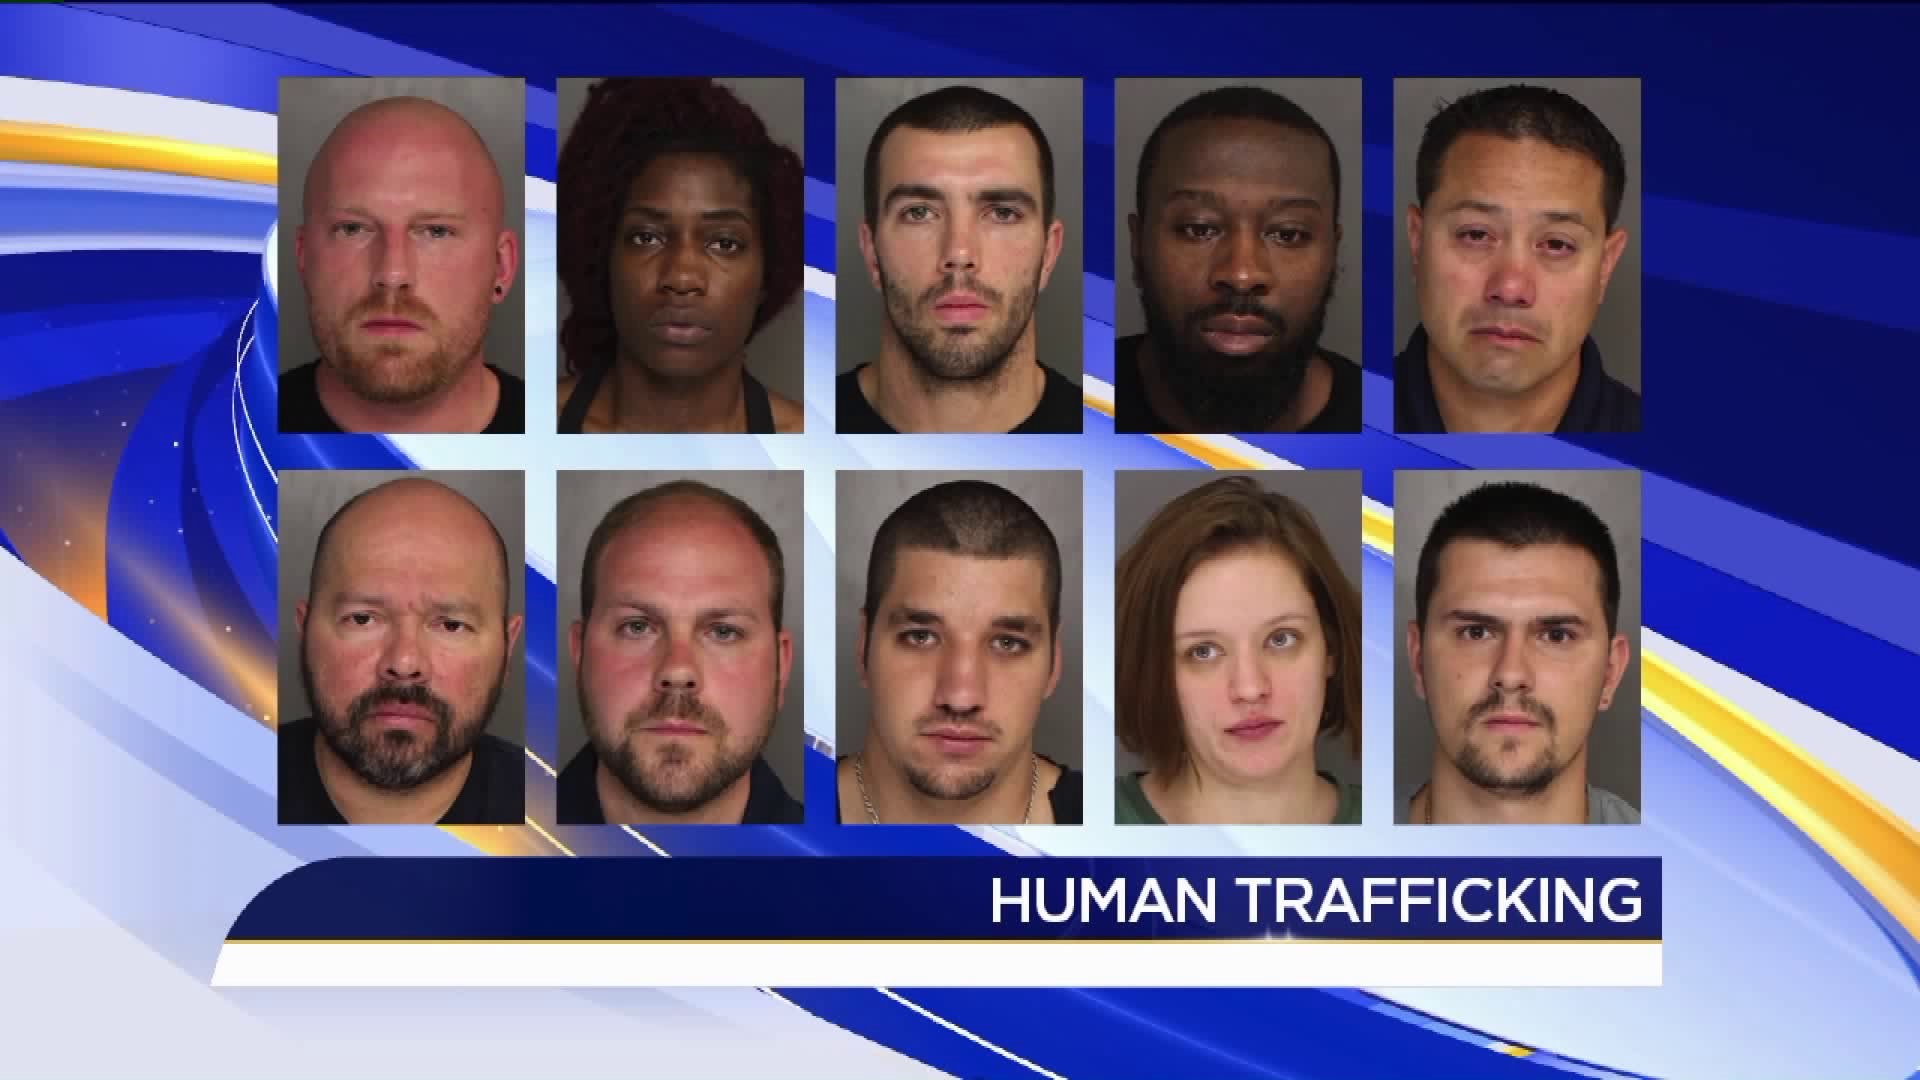 10 Arrested in Connection to Human Trafficking in the Poconos